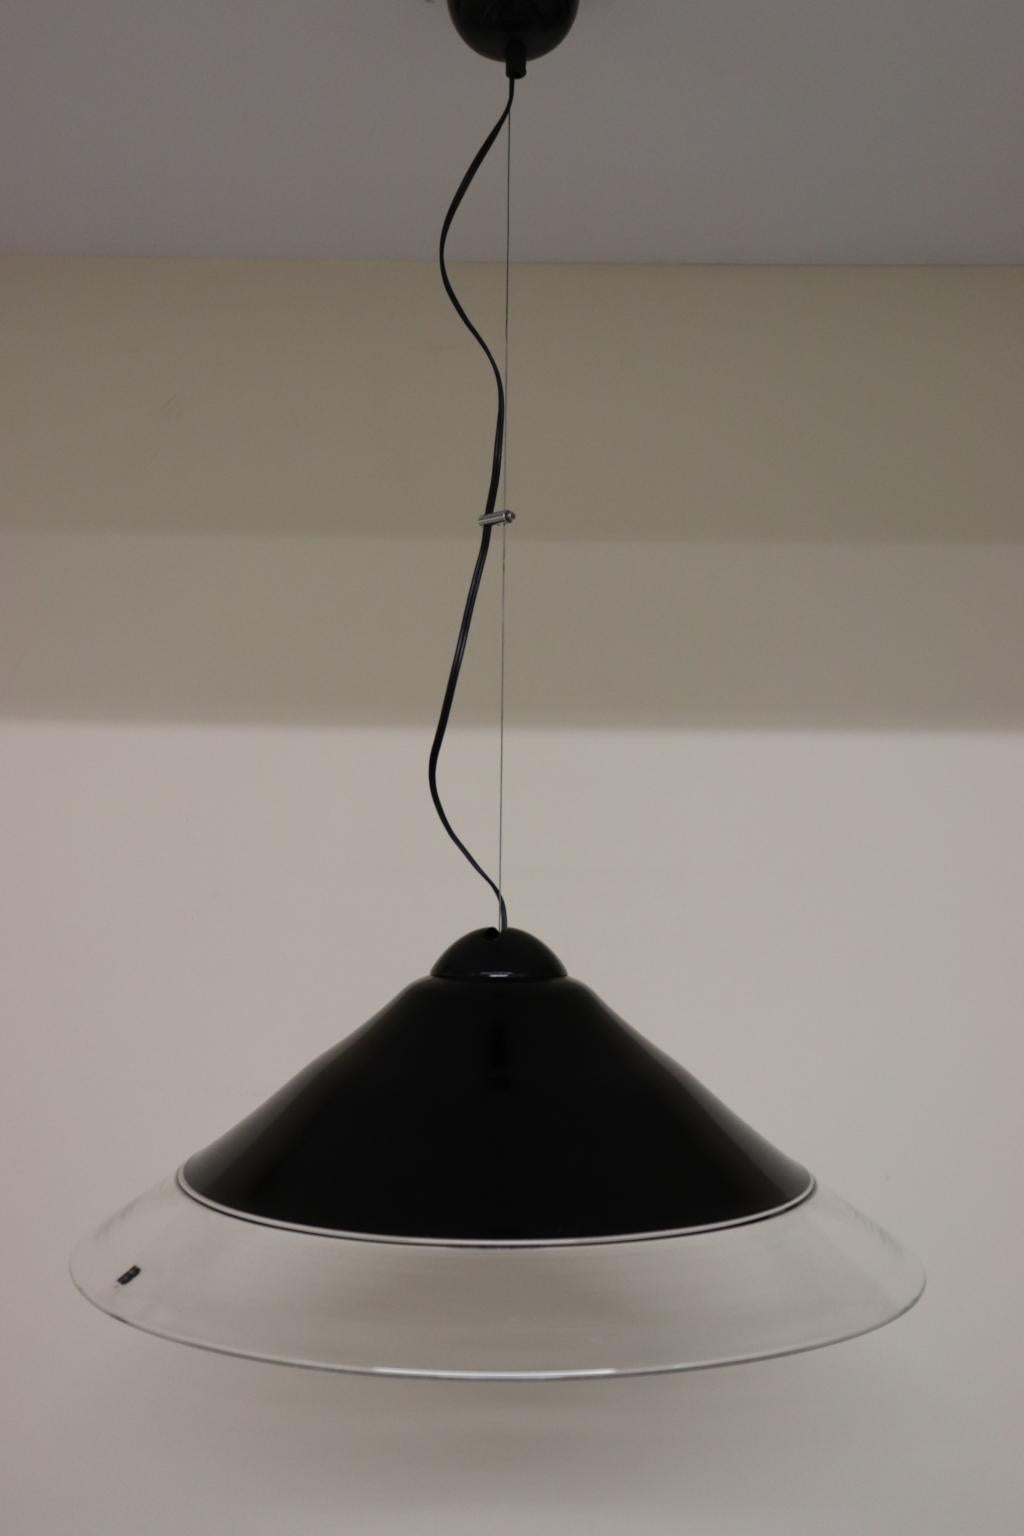 Vintage Italian pendant lamp in Murano black-crystal glass diffuser.
Manufactured by ITRE.
Dimensions: Diameter 21.50